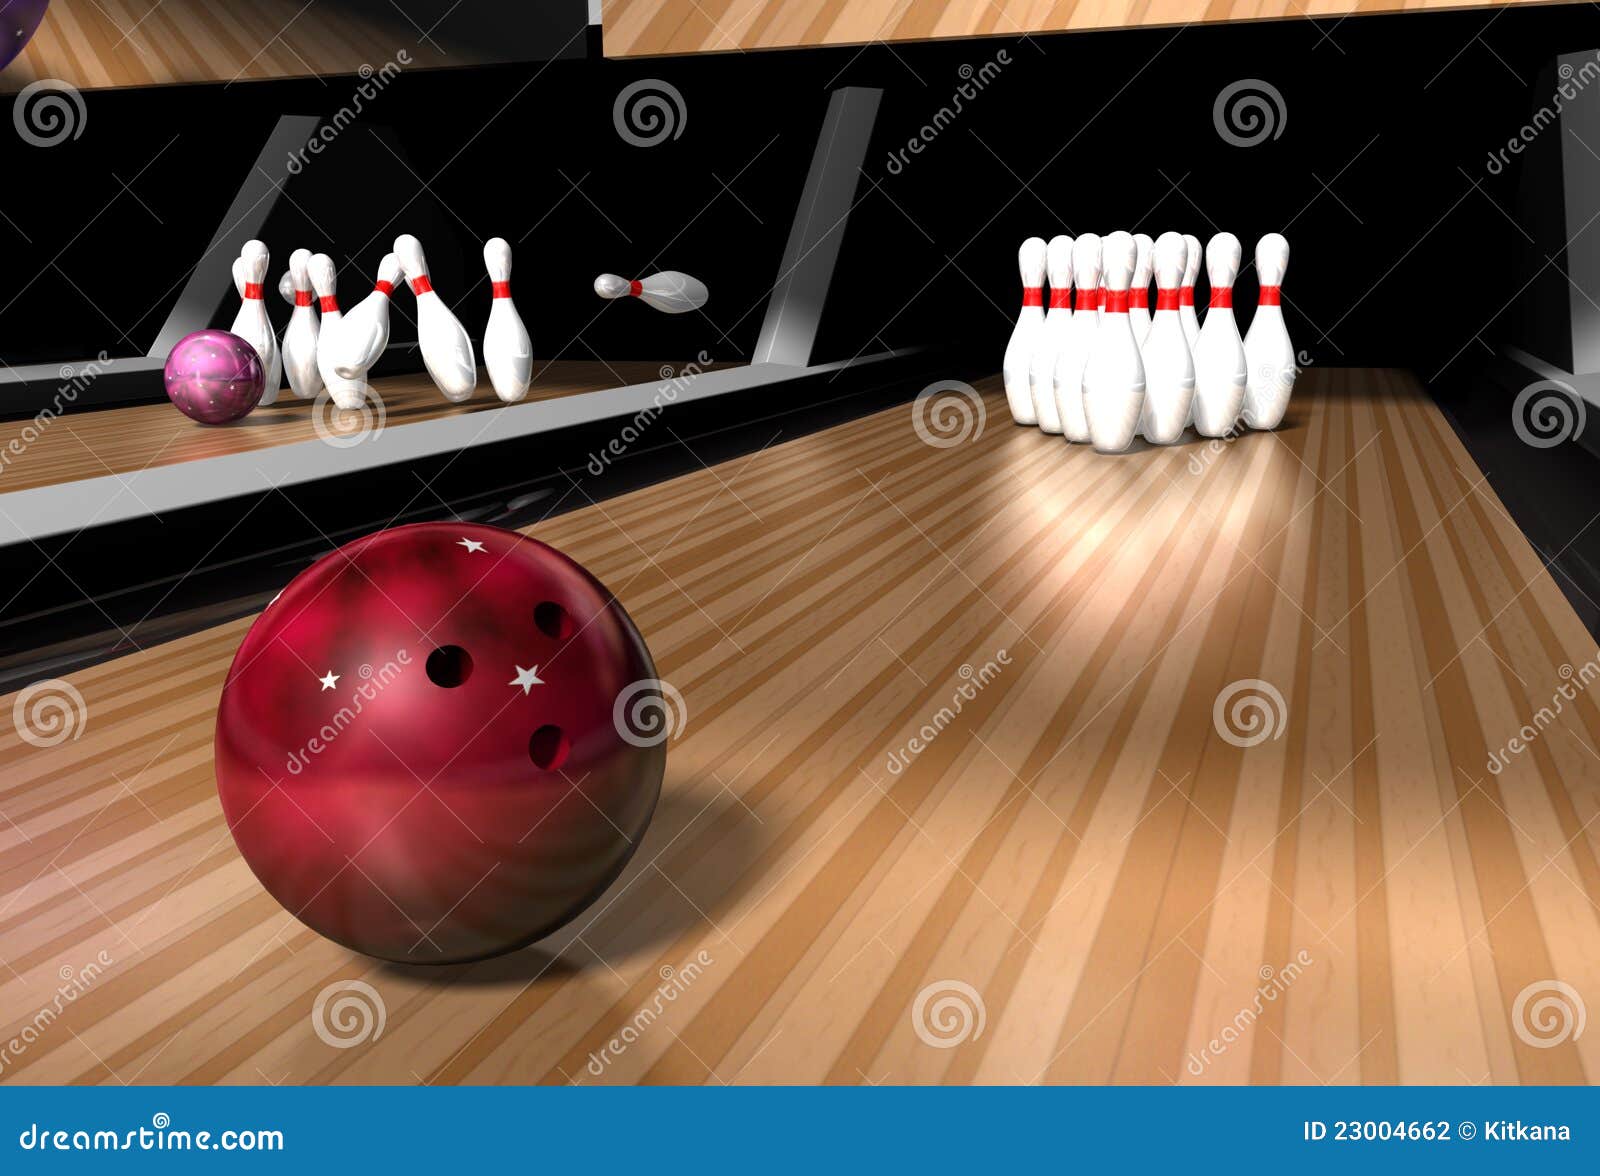 Bowling alley stock illustration